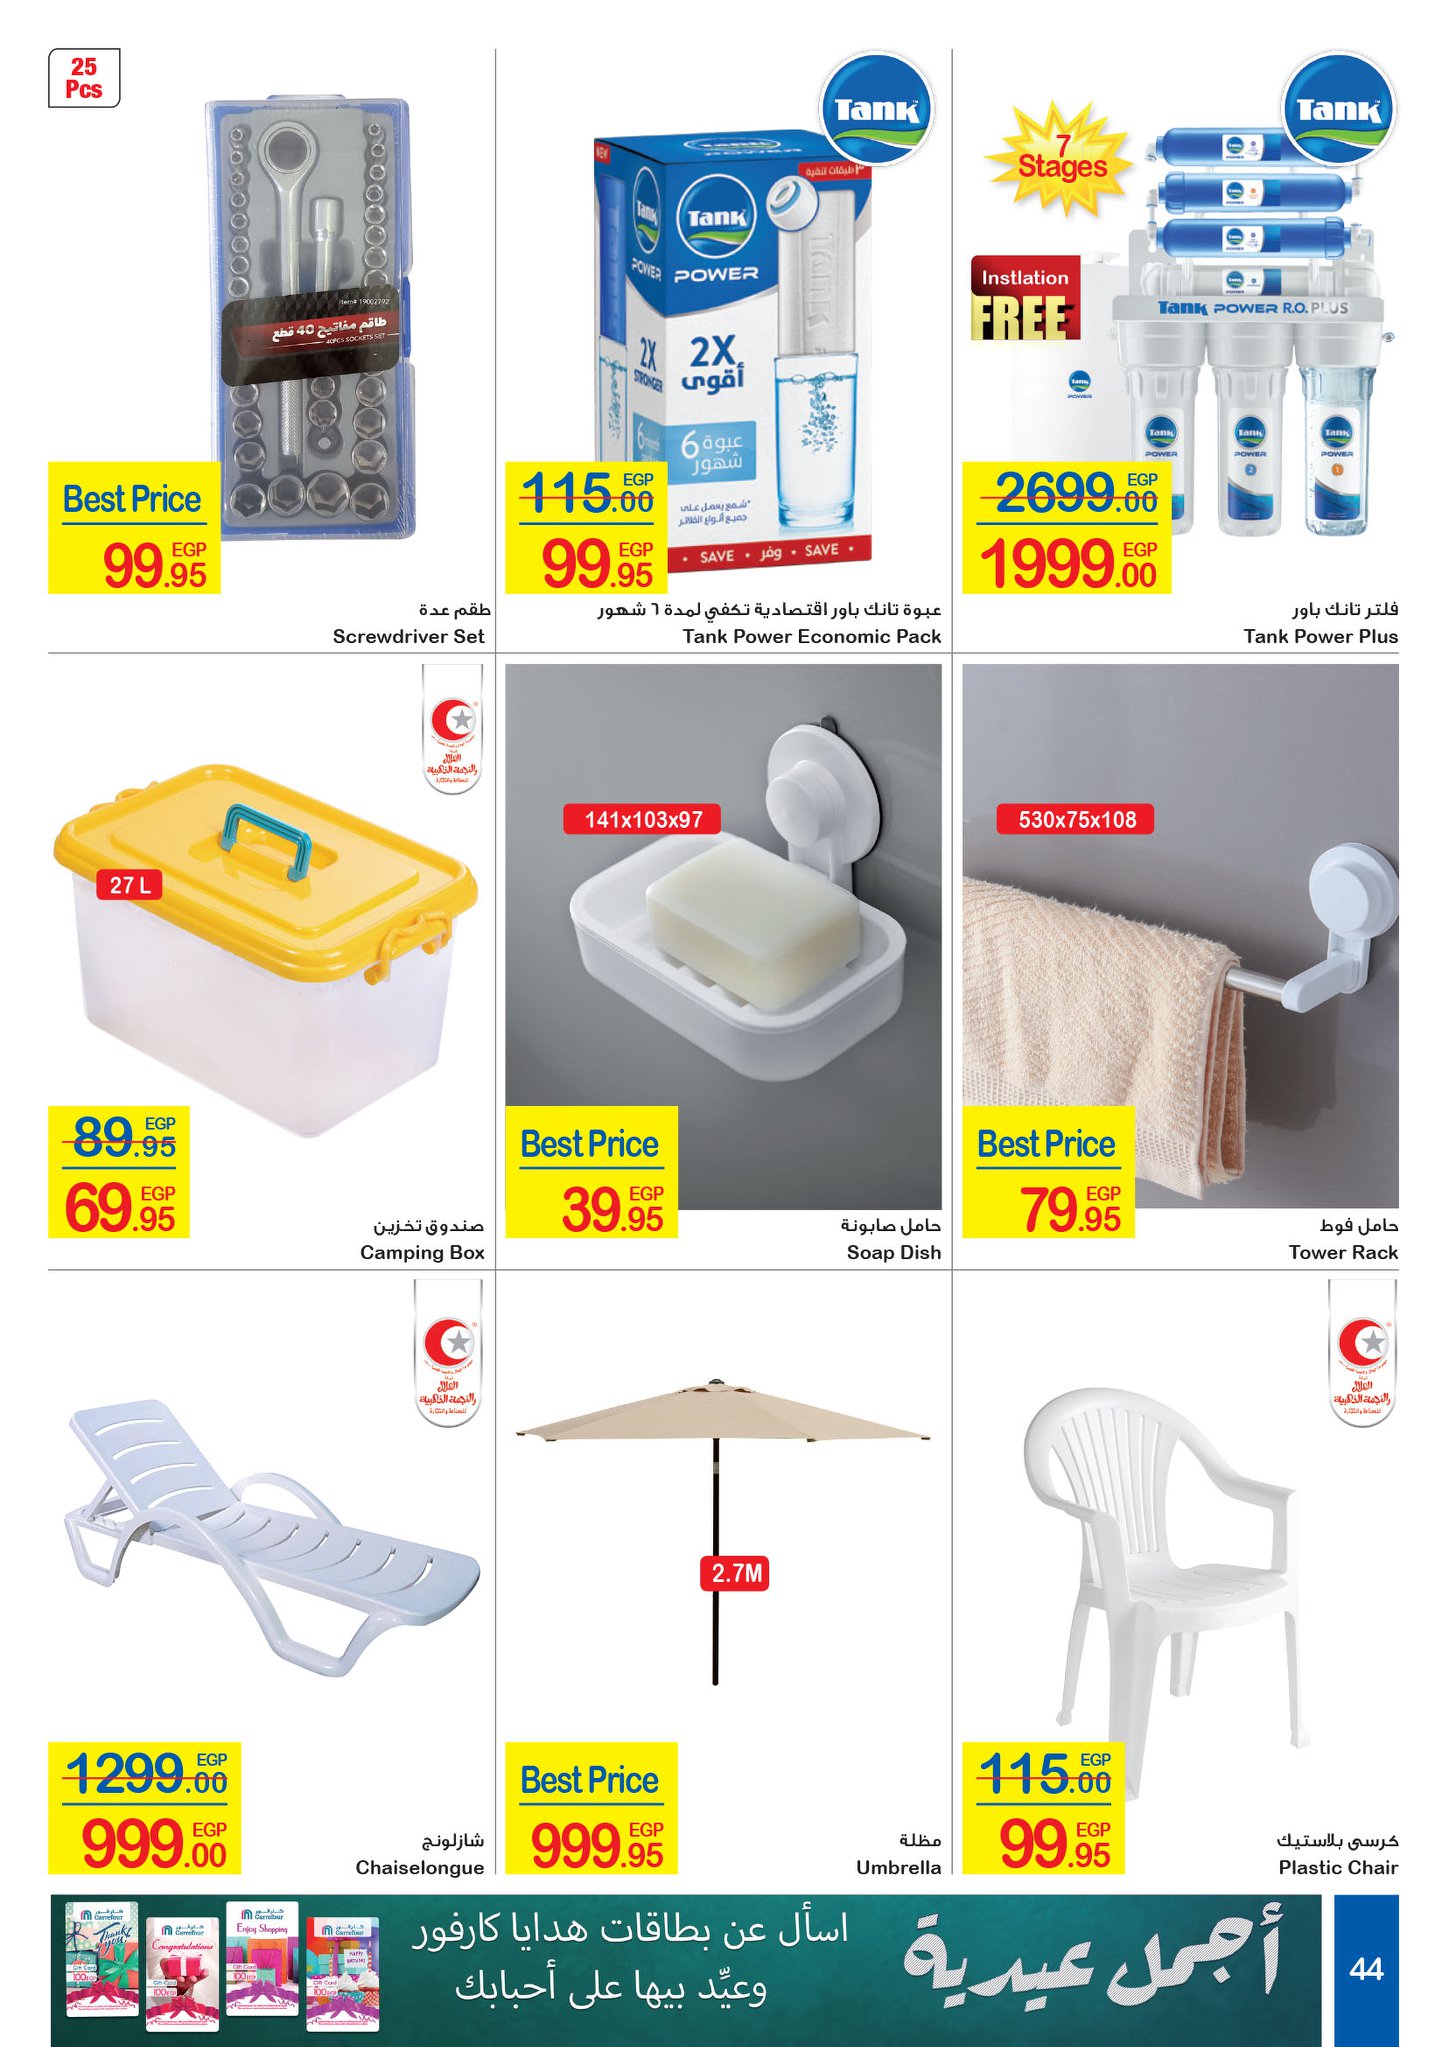 Carrefour Flyer from 16/7 till 27/7 | Carrefour Egypt 43